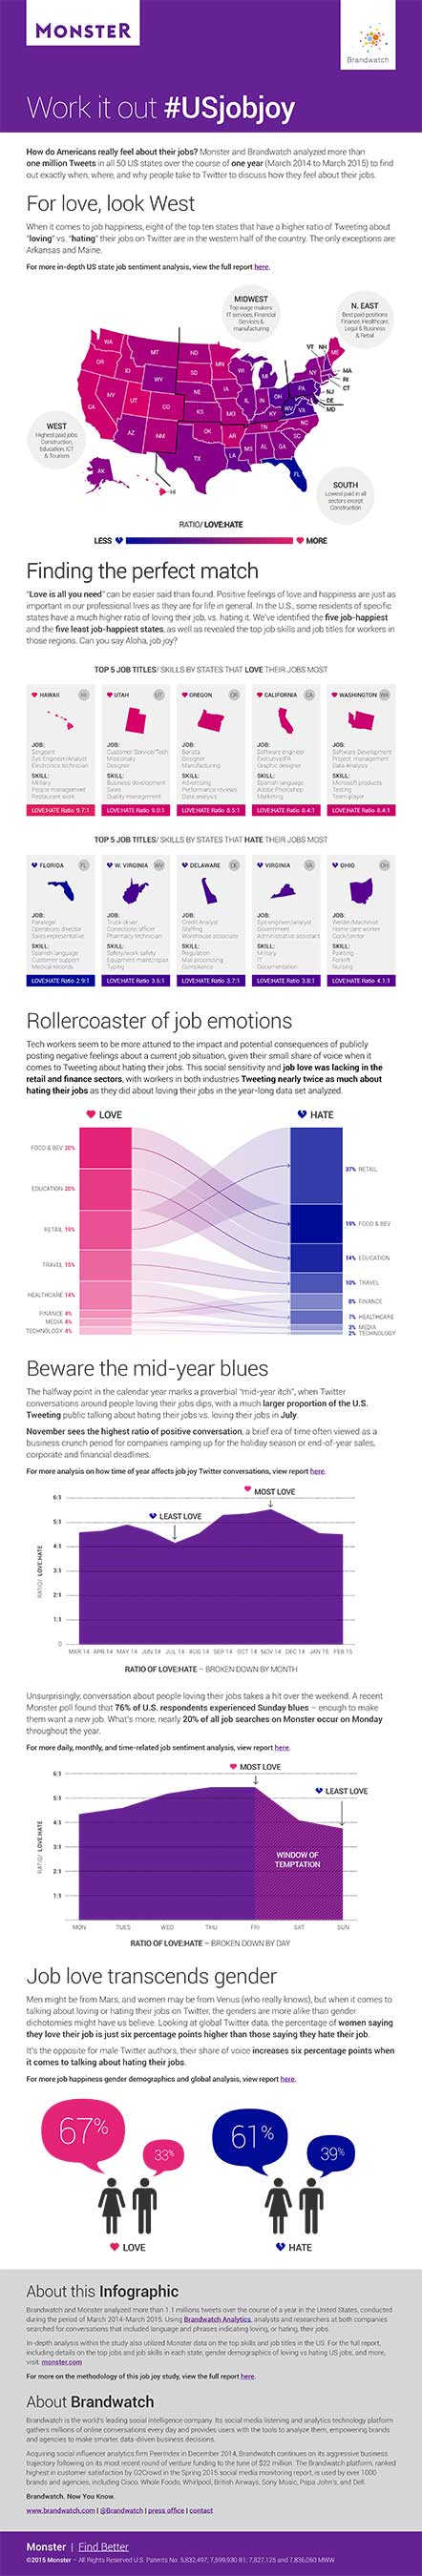 Monster and Brandwatch Analysis Infographic